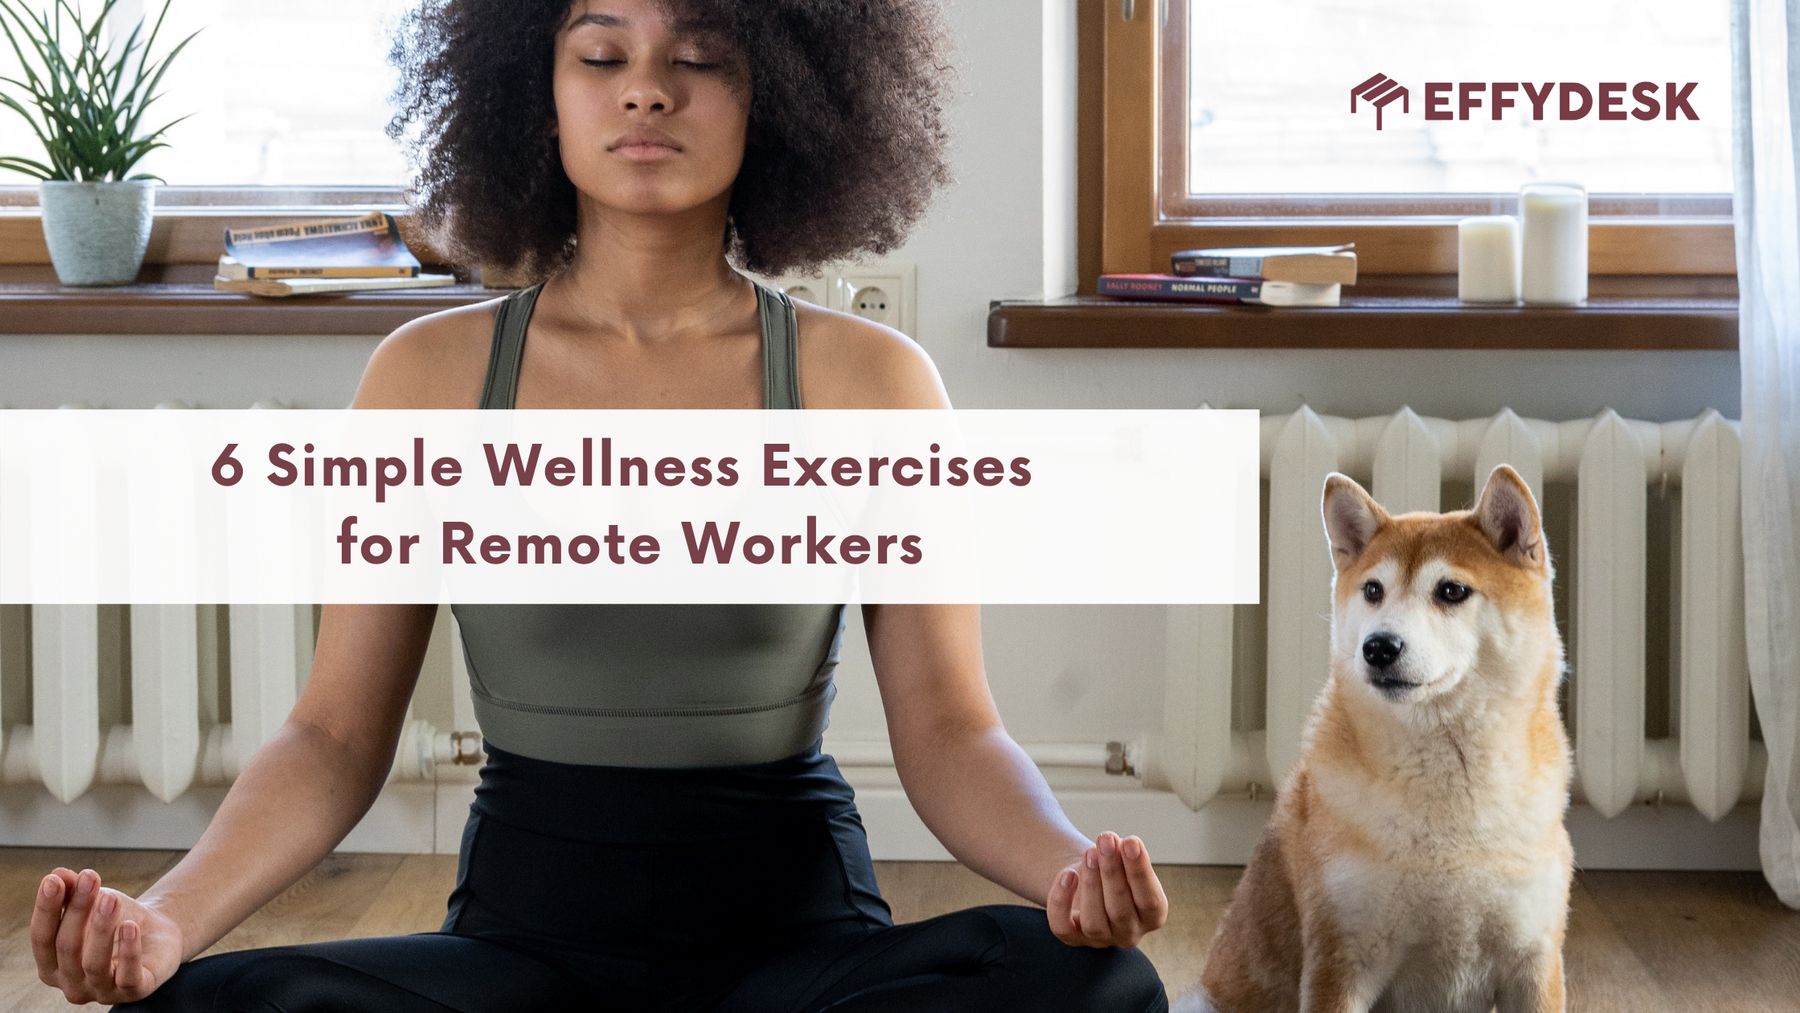 Simple wellness exercises for remote workers to bring your more energy